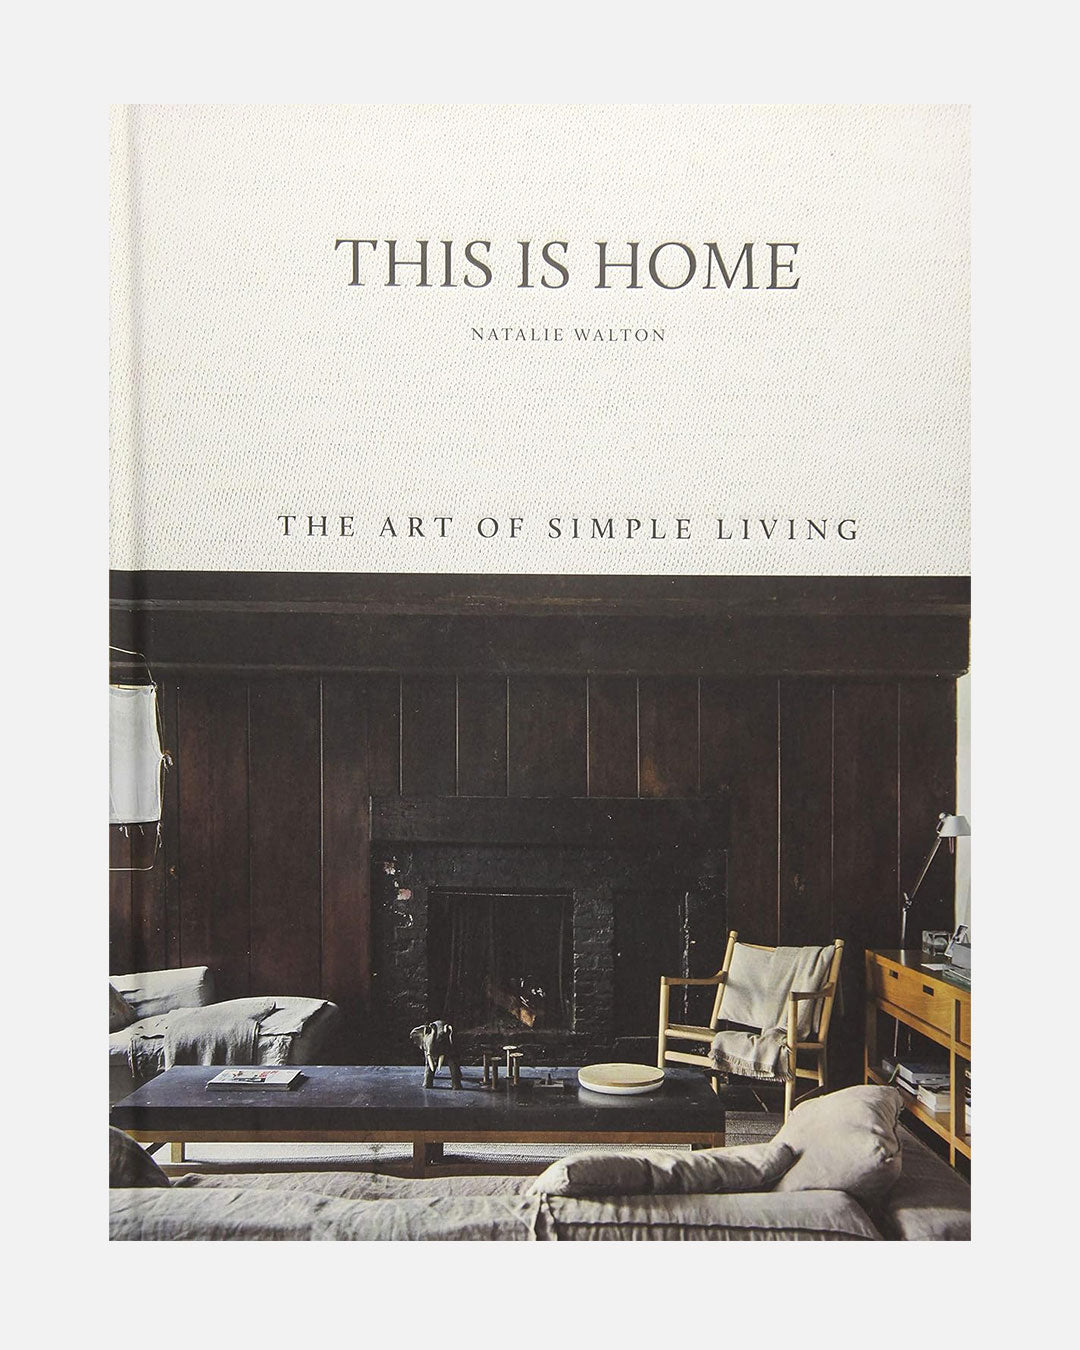 This is Home: The Art of Simple Living by Natalie Walton